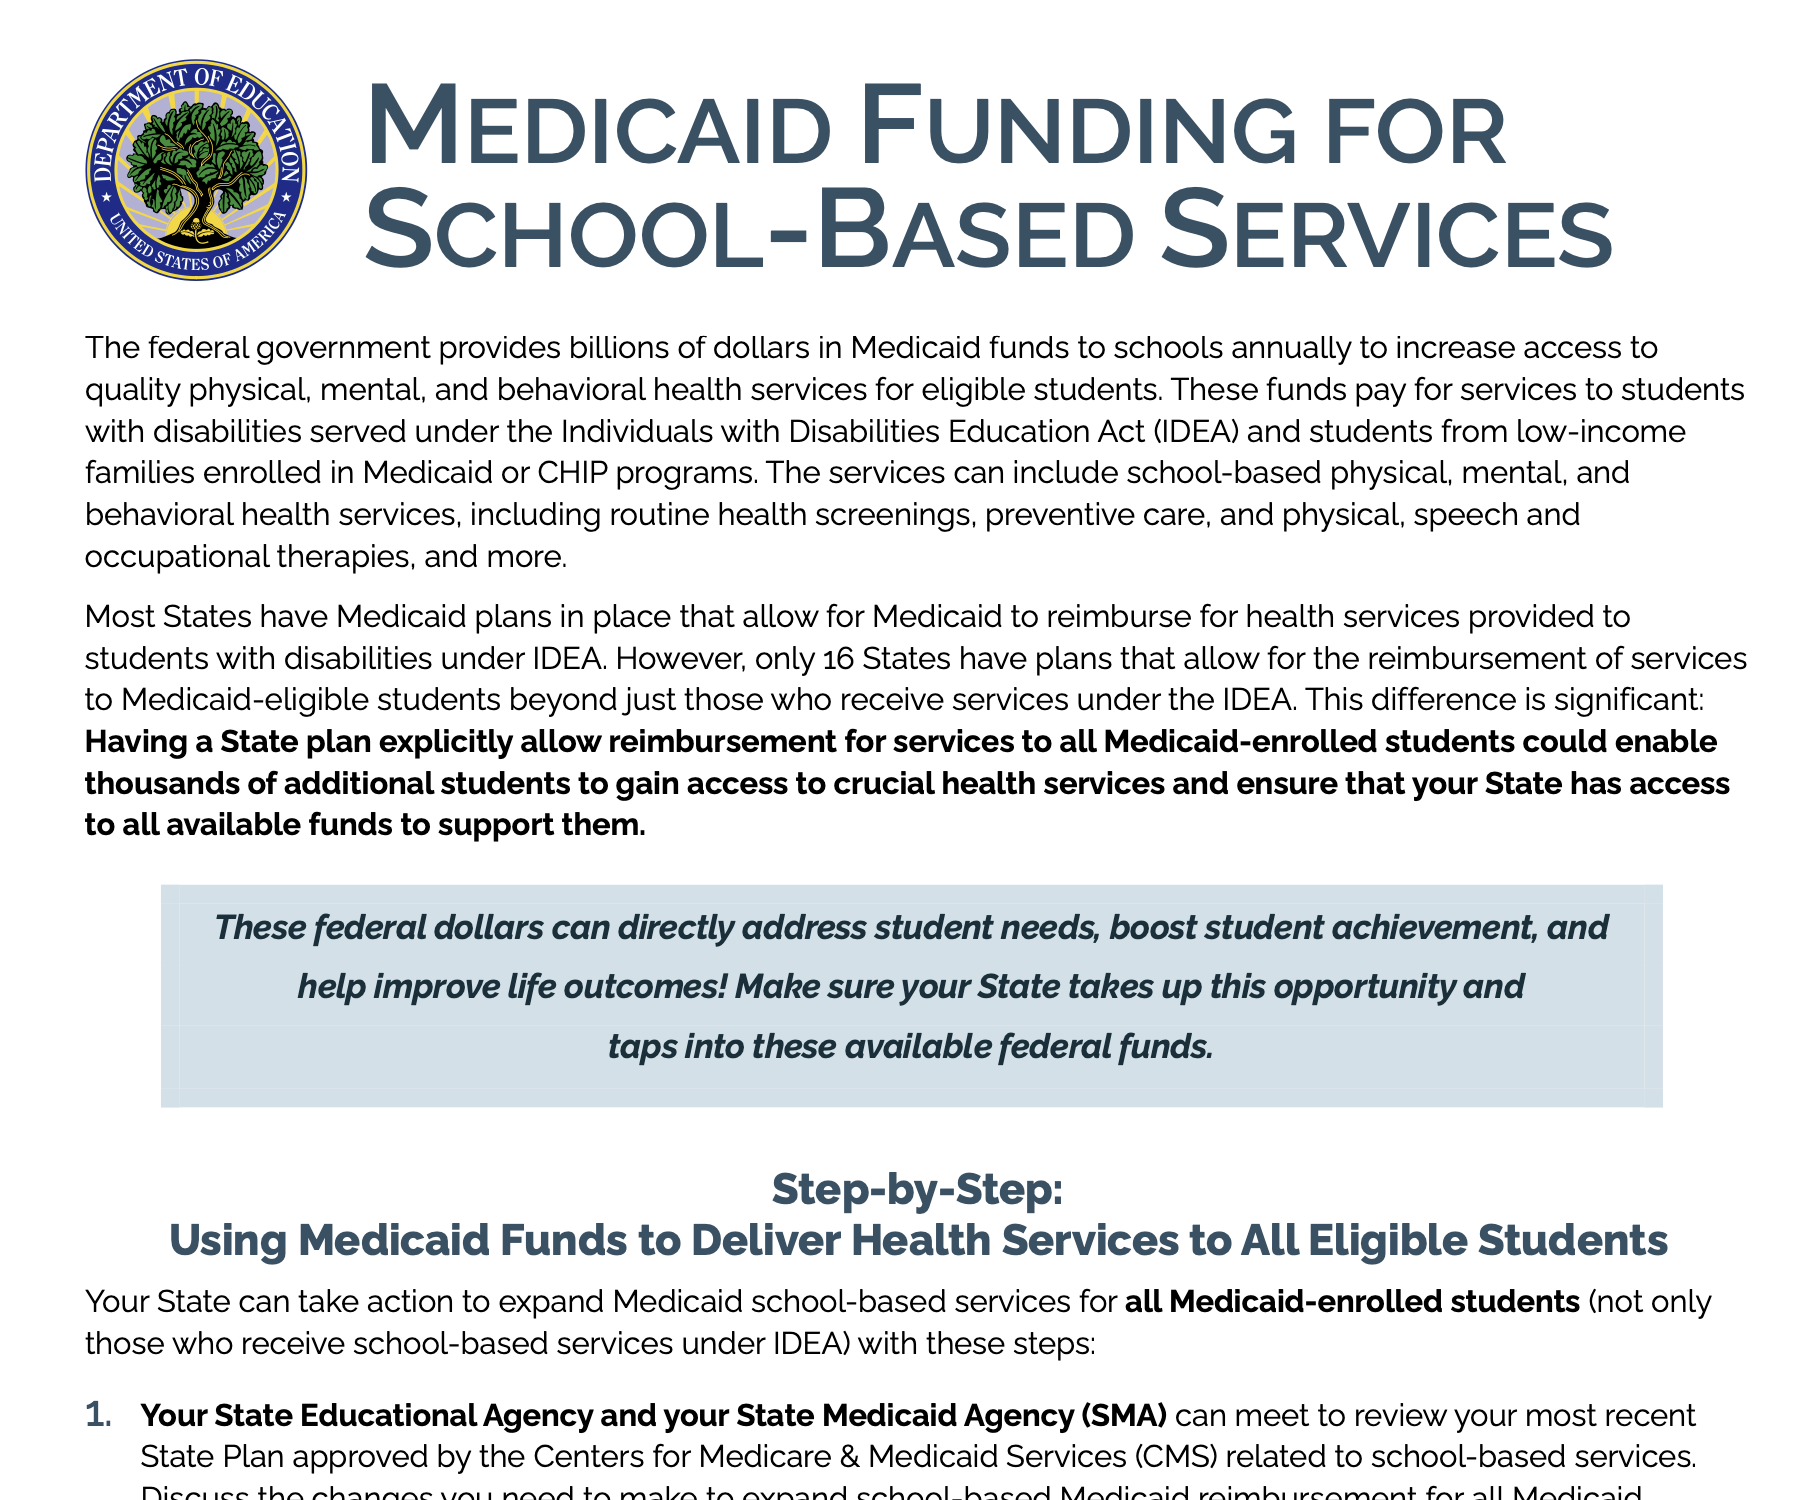 OSERS Medicaid Guidance